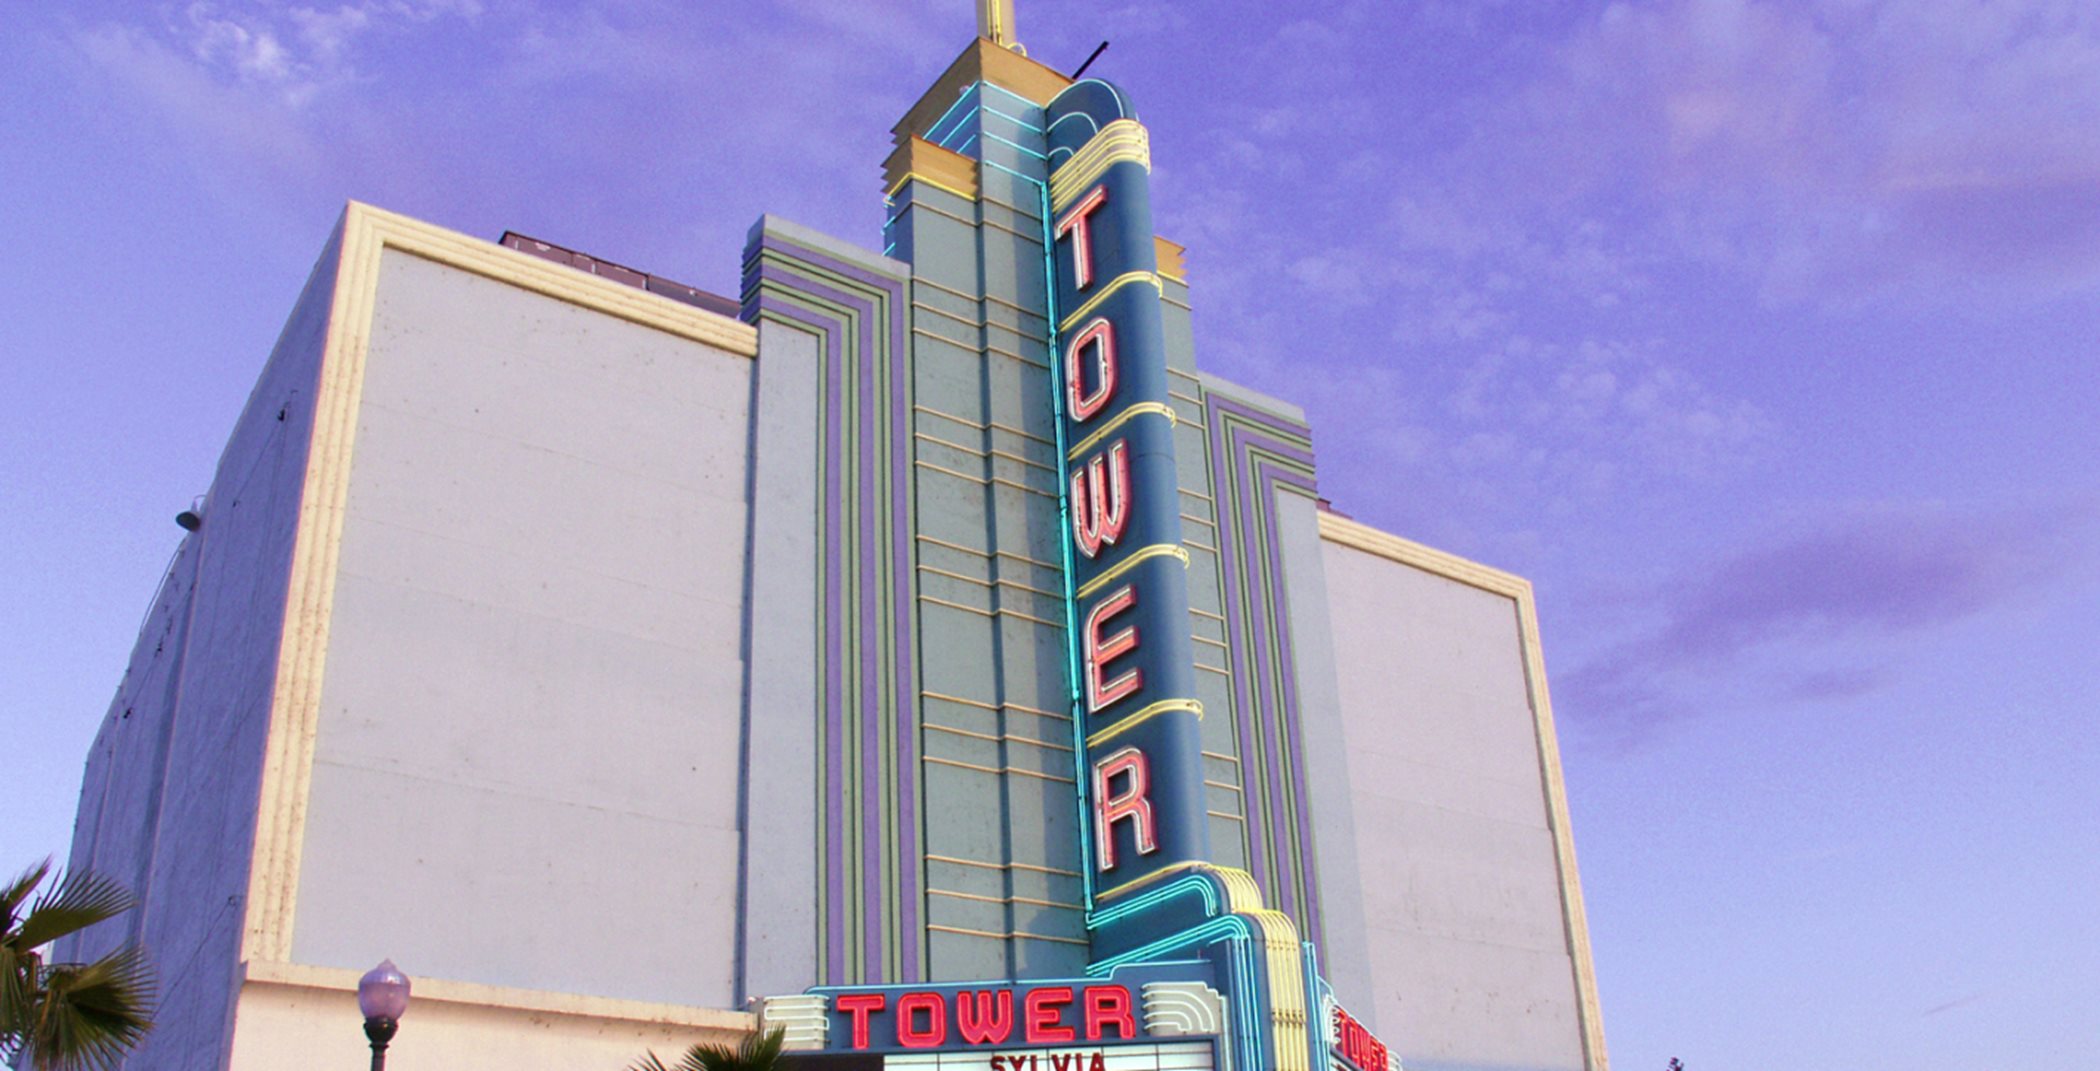 The Tower Theater at dusk